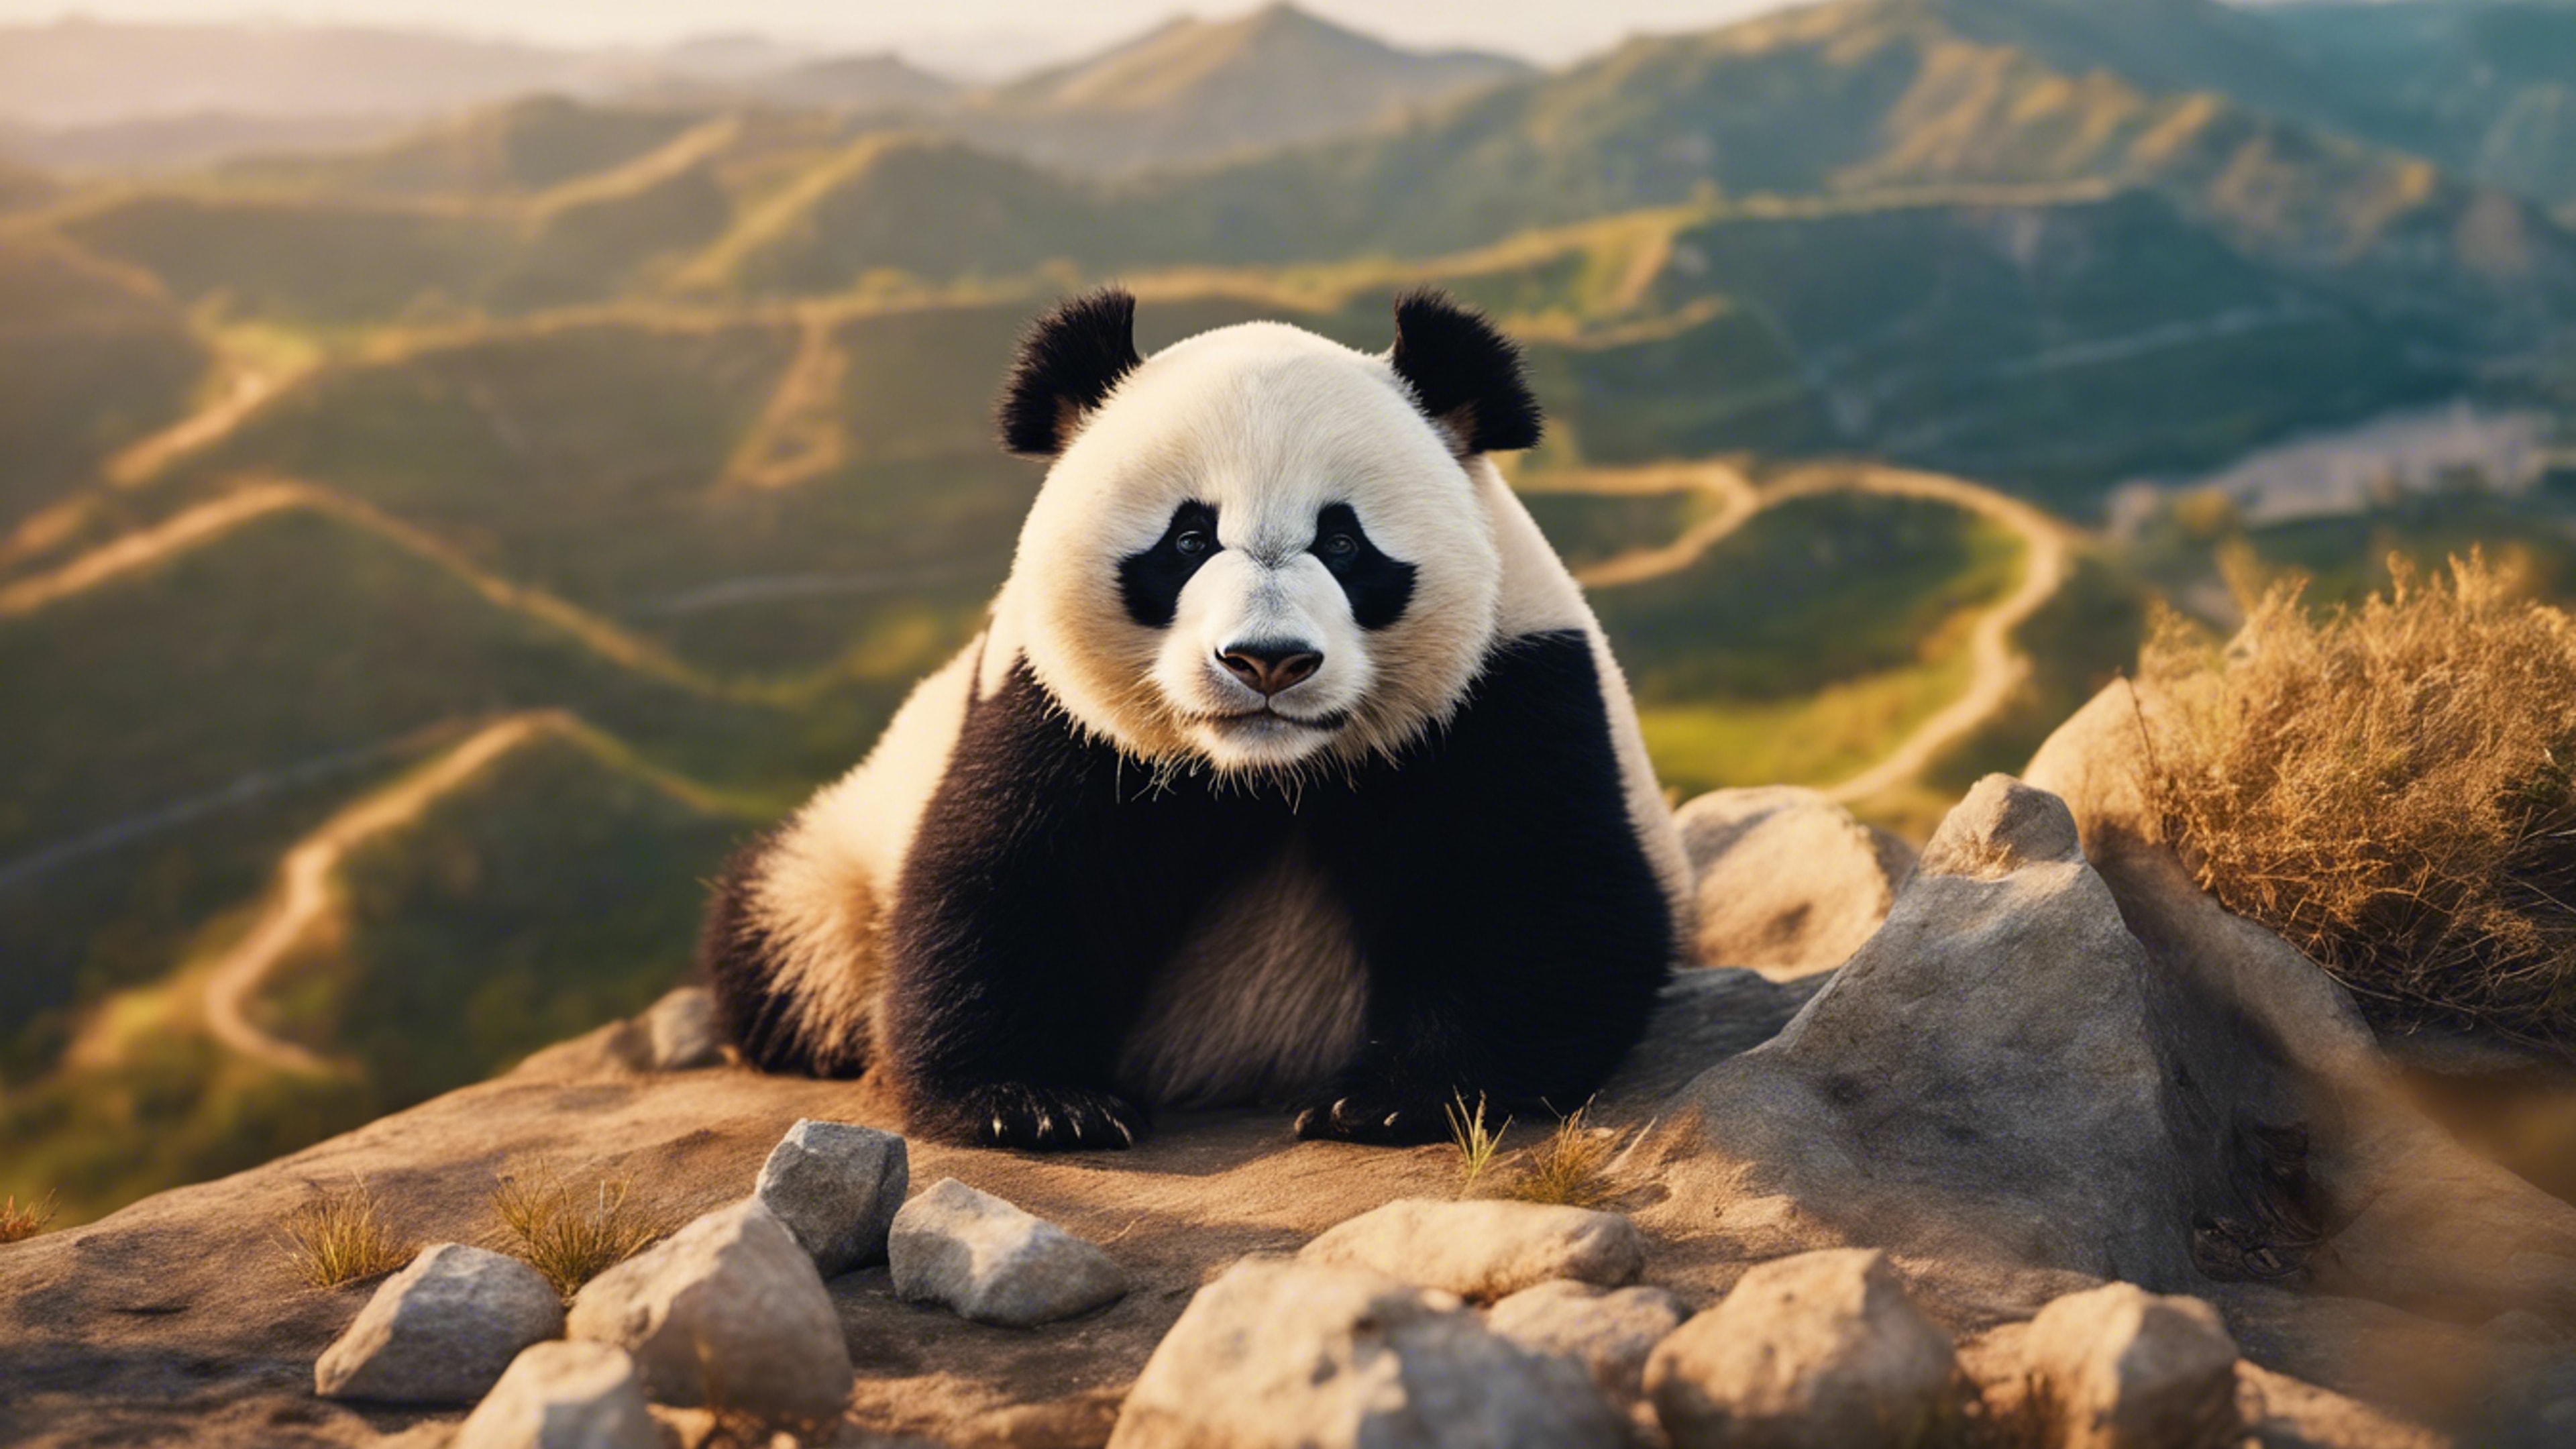 A proud panda basking in the warm sunlight, on a cliff overlooking a wide, beautiful valley. Sfondo[f1b4c4cbced14ad39a34]